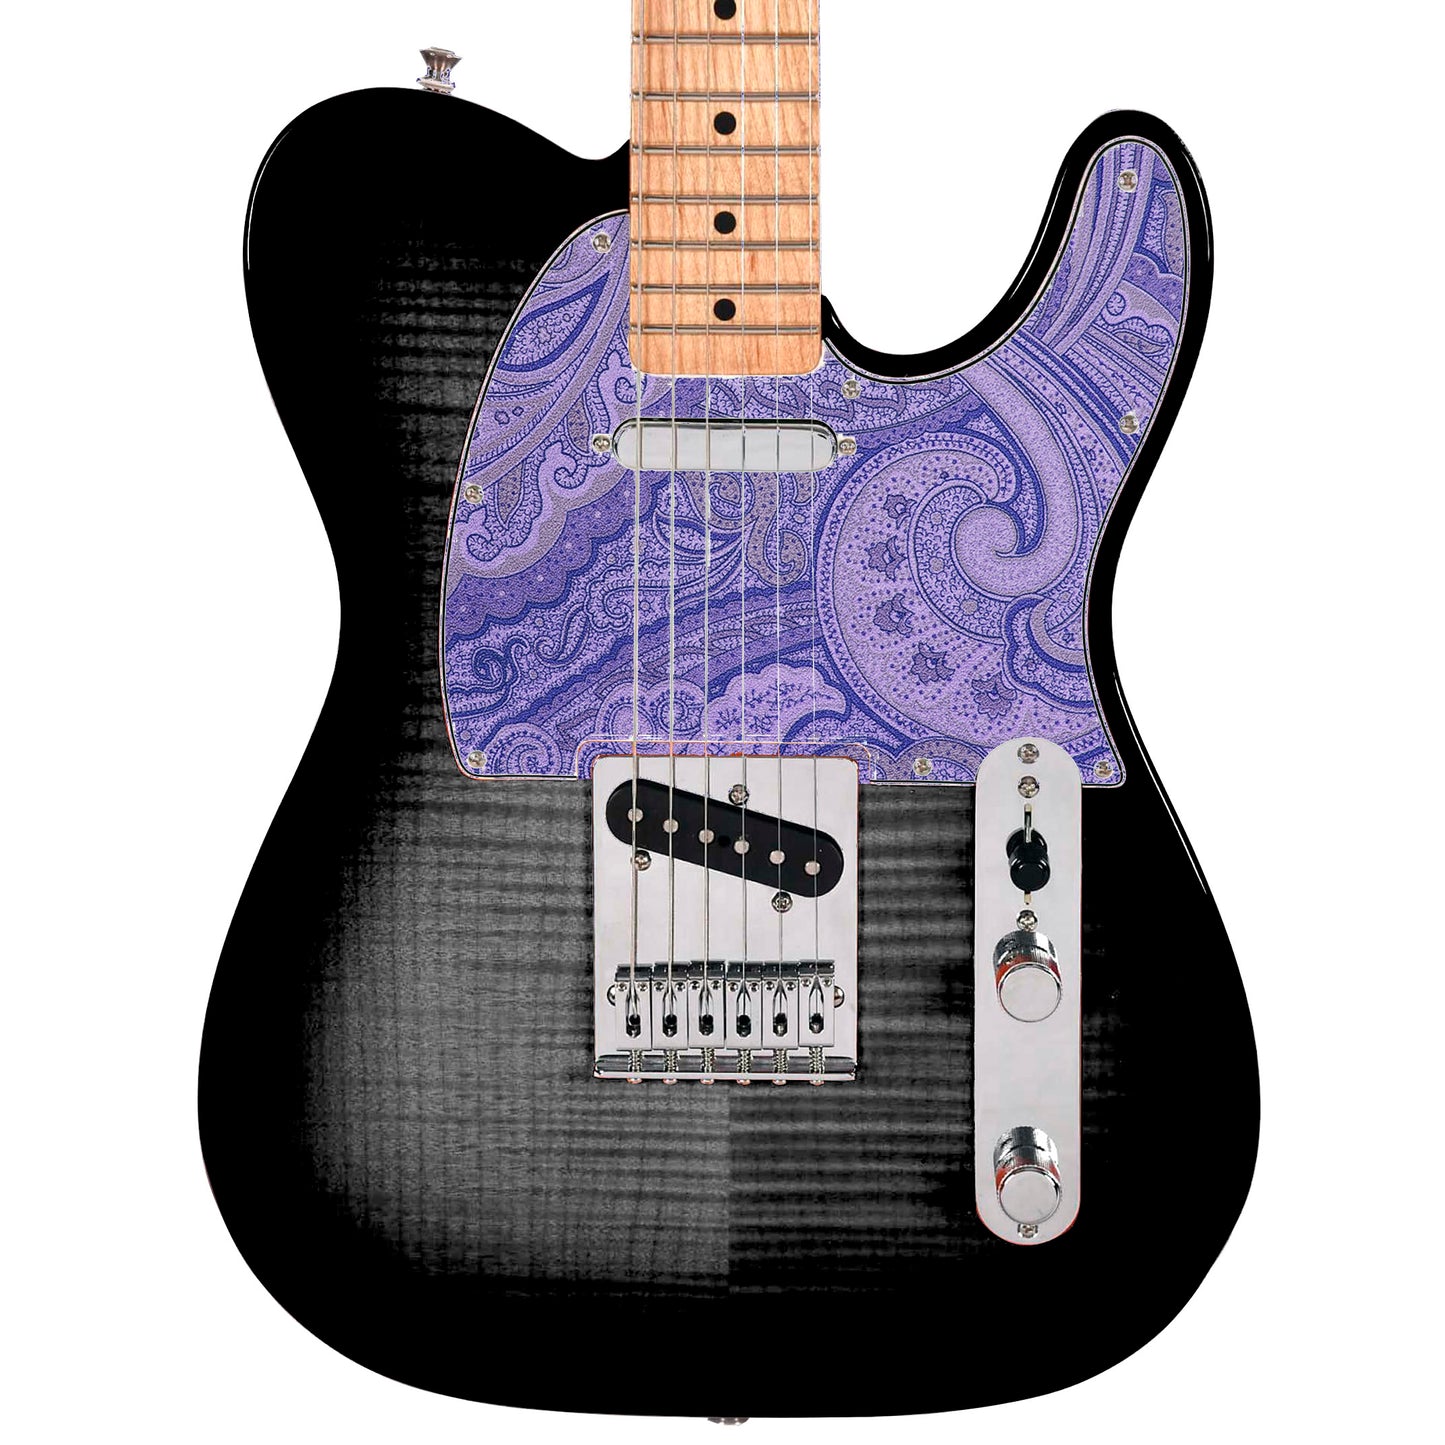 Guitar Custom PickGuard Sticker Skins. Customise your own existing Pickguard, Headstock, Tremolo Cover plate. The Paisleys PK08